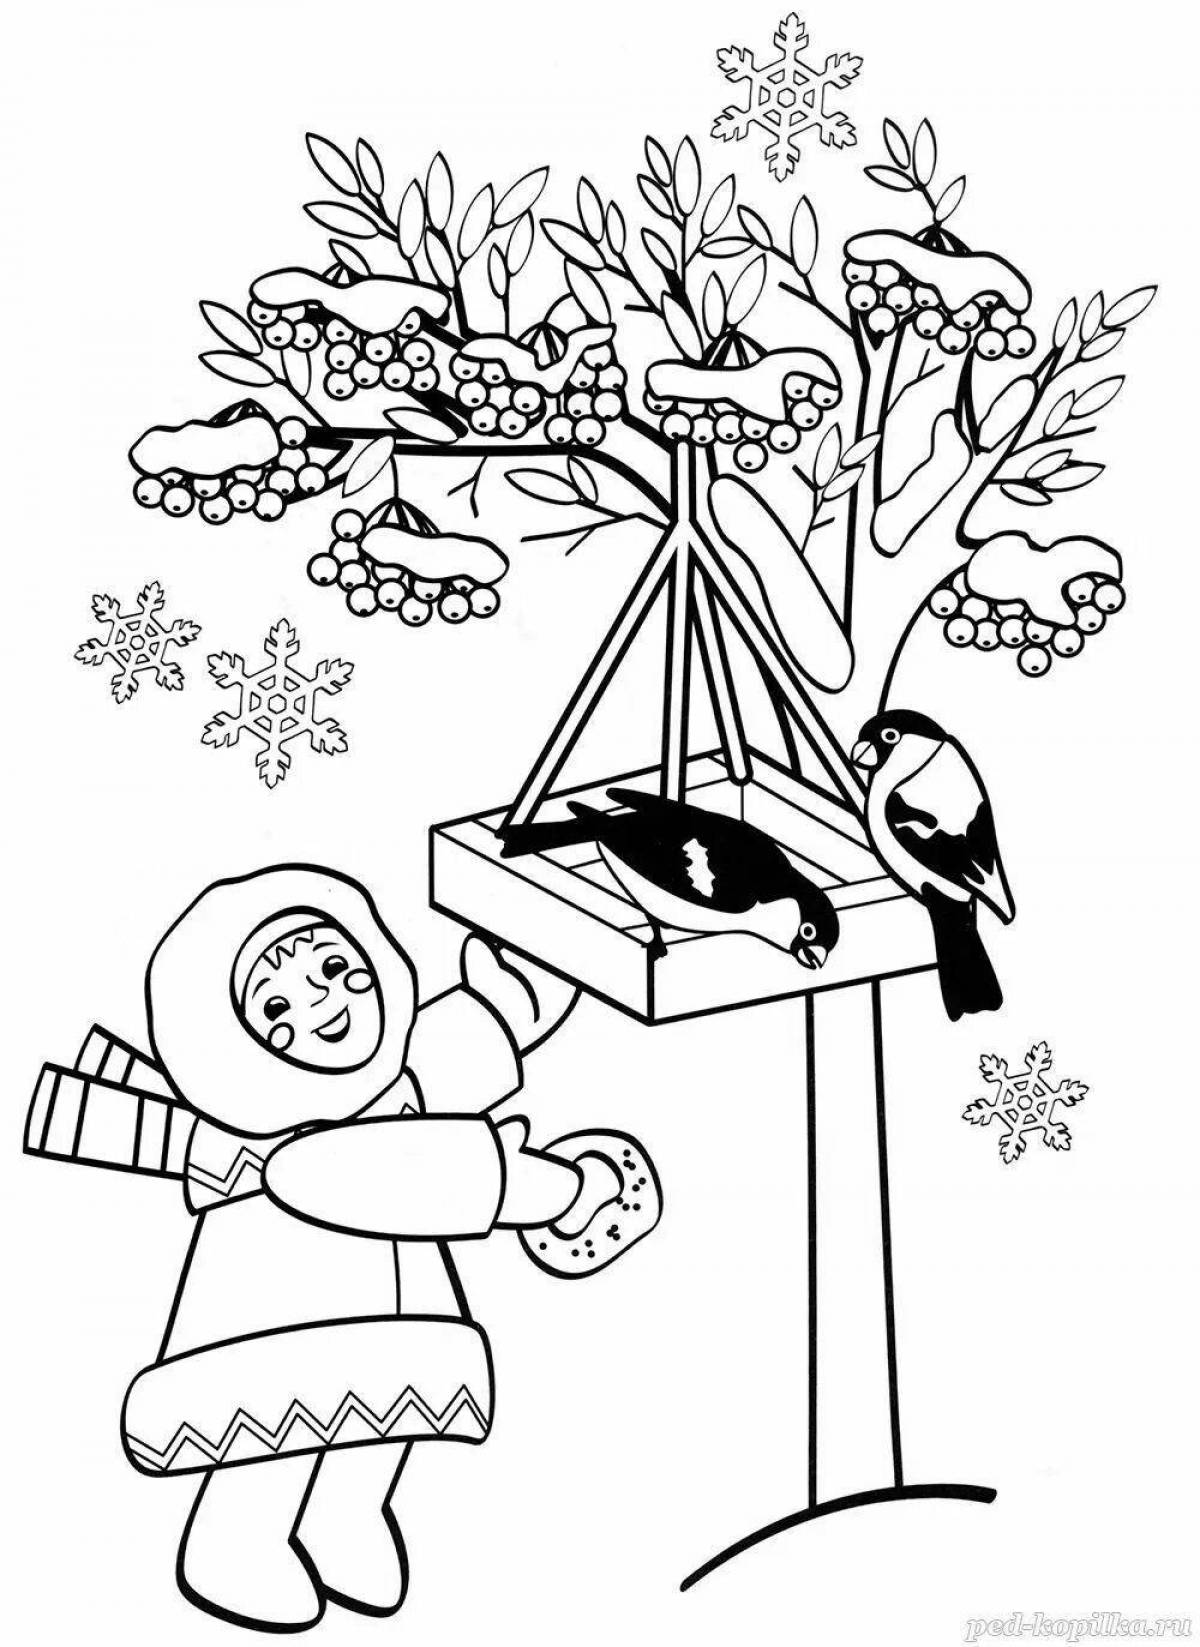 Feed the birds wild coloring page